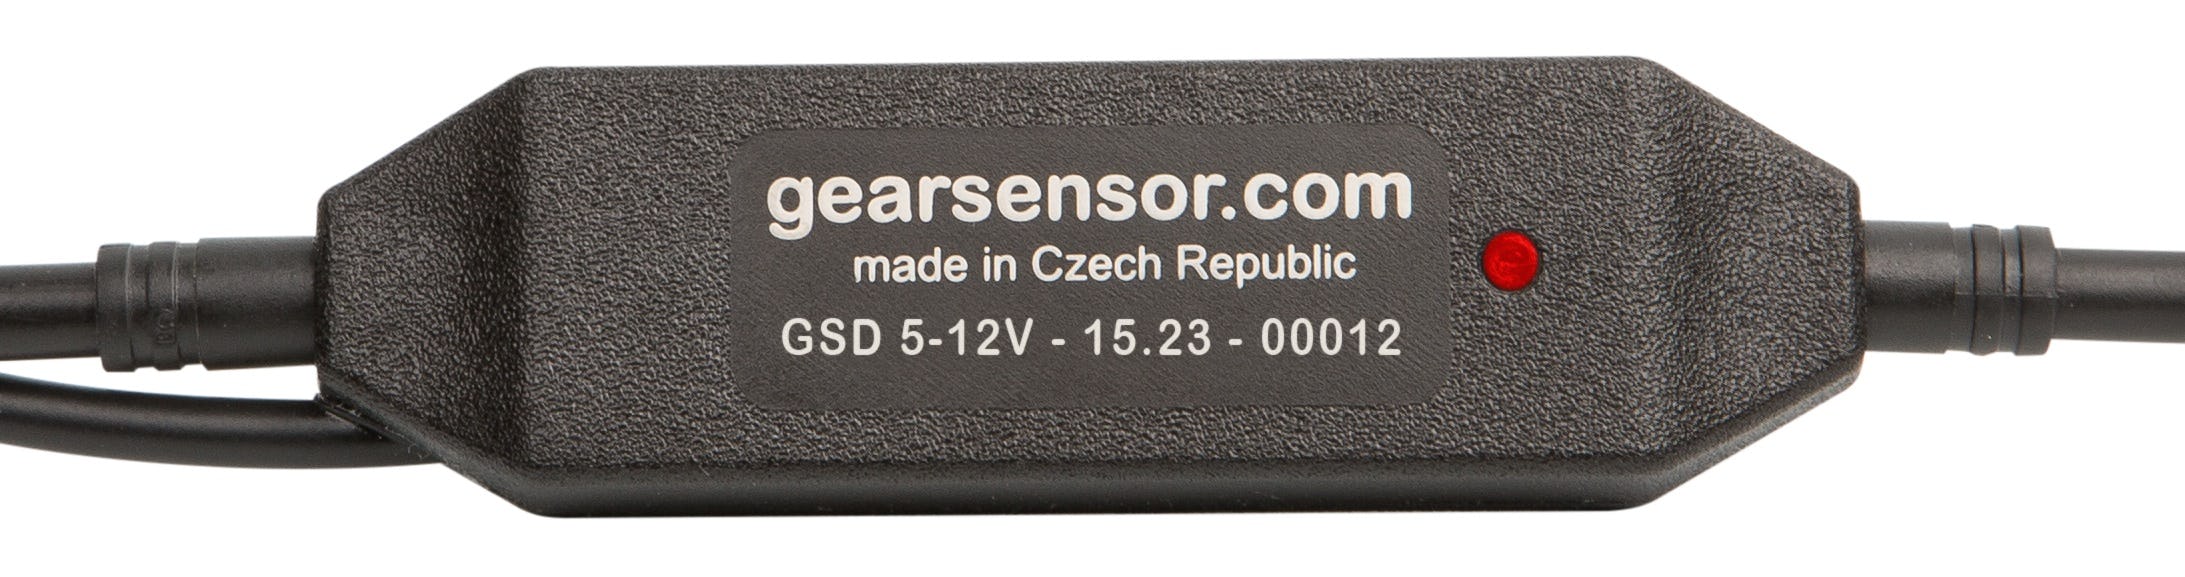 Gearsensor.com is based on an intelligent shifting sensor fixed on the shifting cable, which is reducing or cutting off the motor power when the rider shifts. – Photo Gearsensor.com